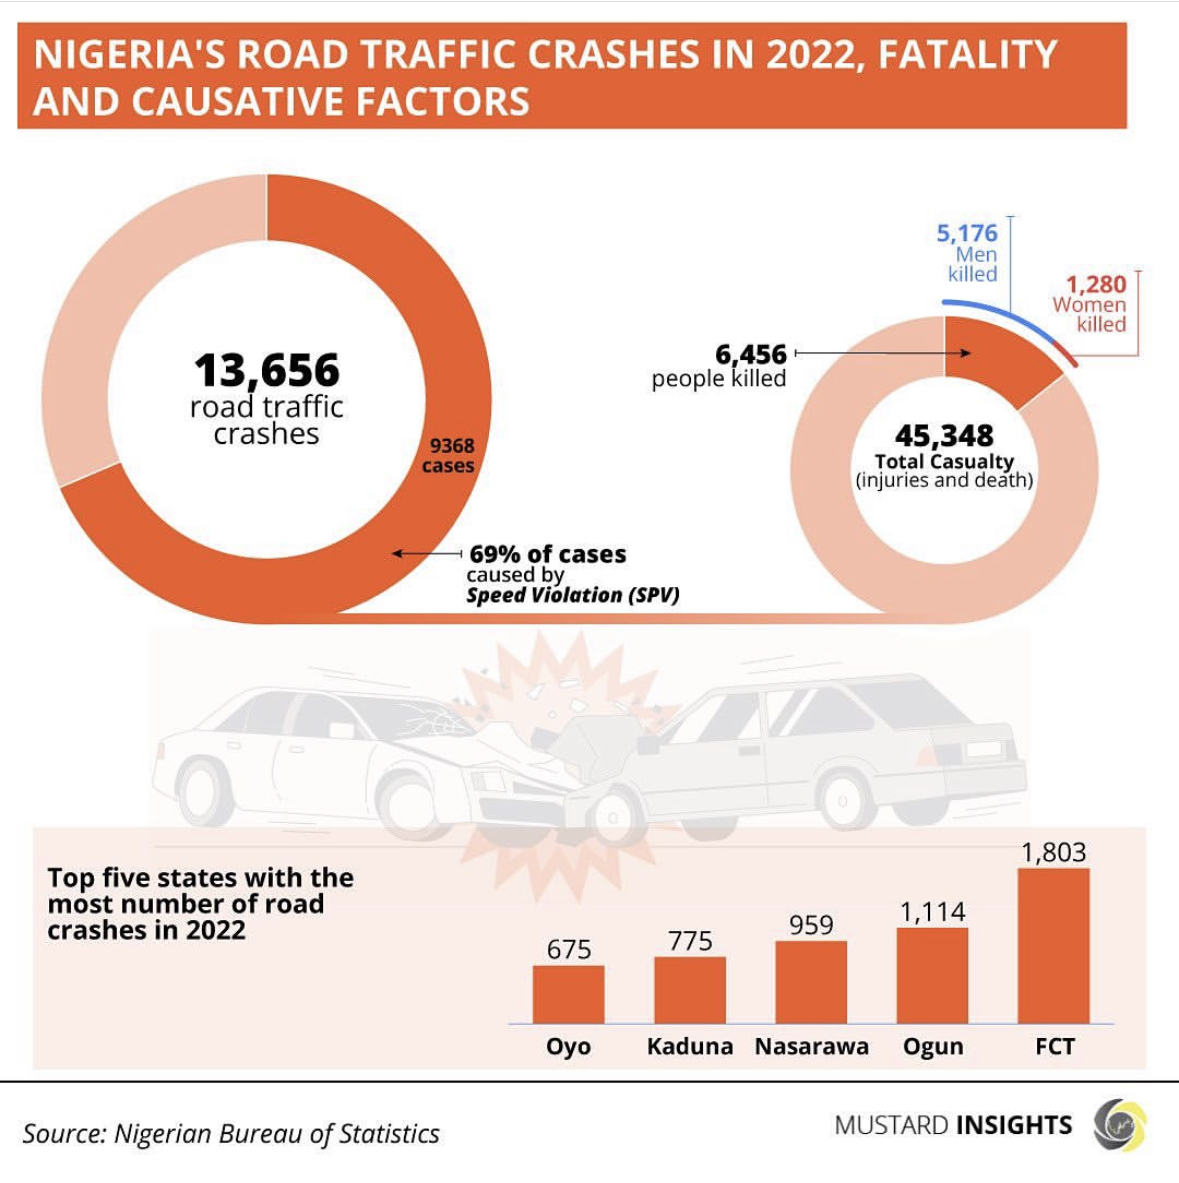 Nigeria’s Road Traffic Crashes In 2022, Fatality and Causative Factors